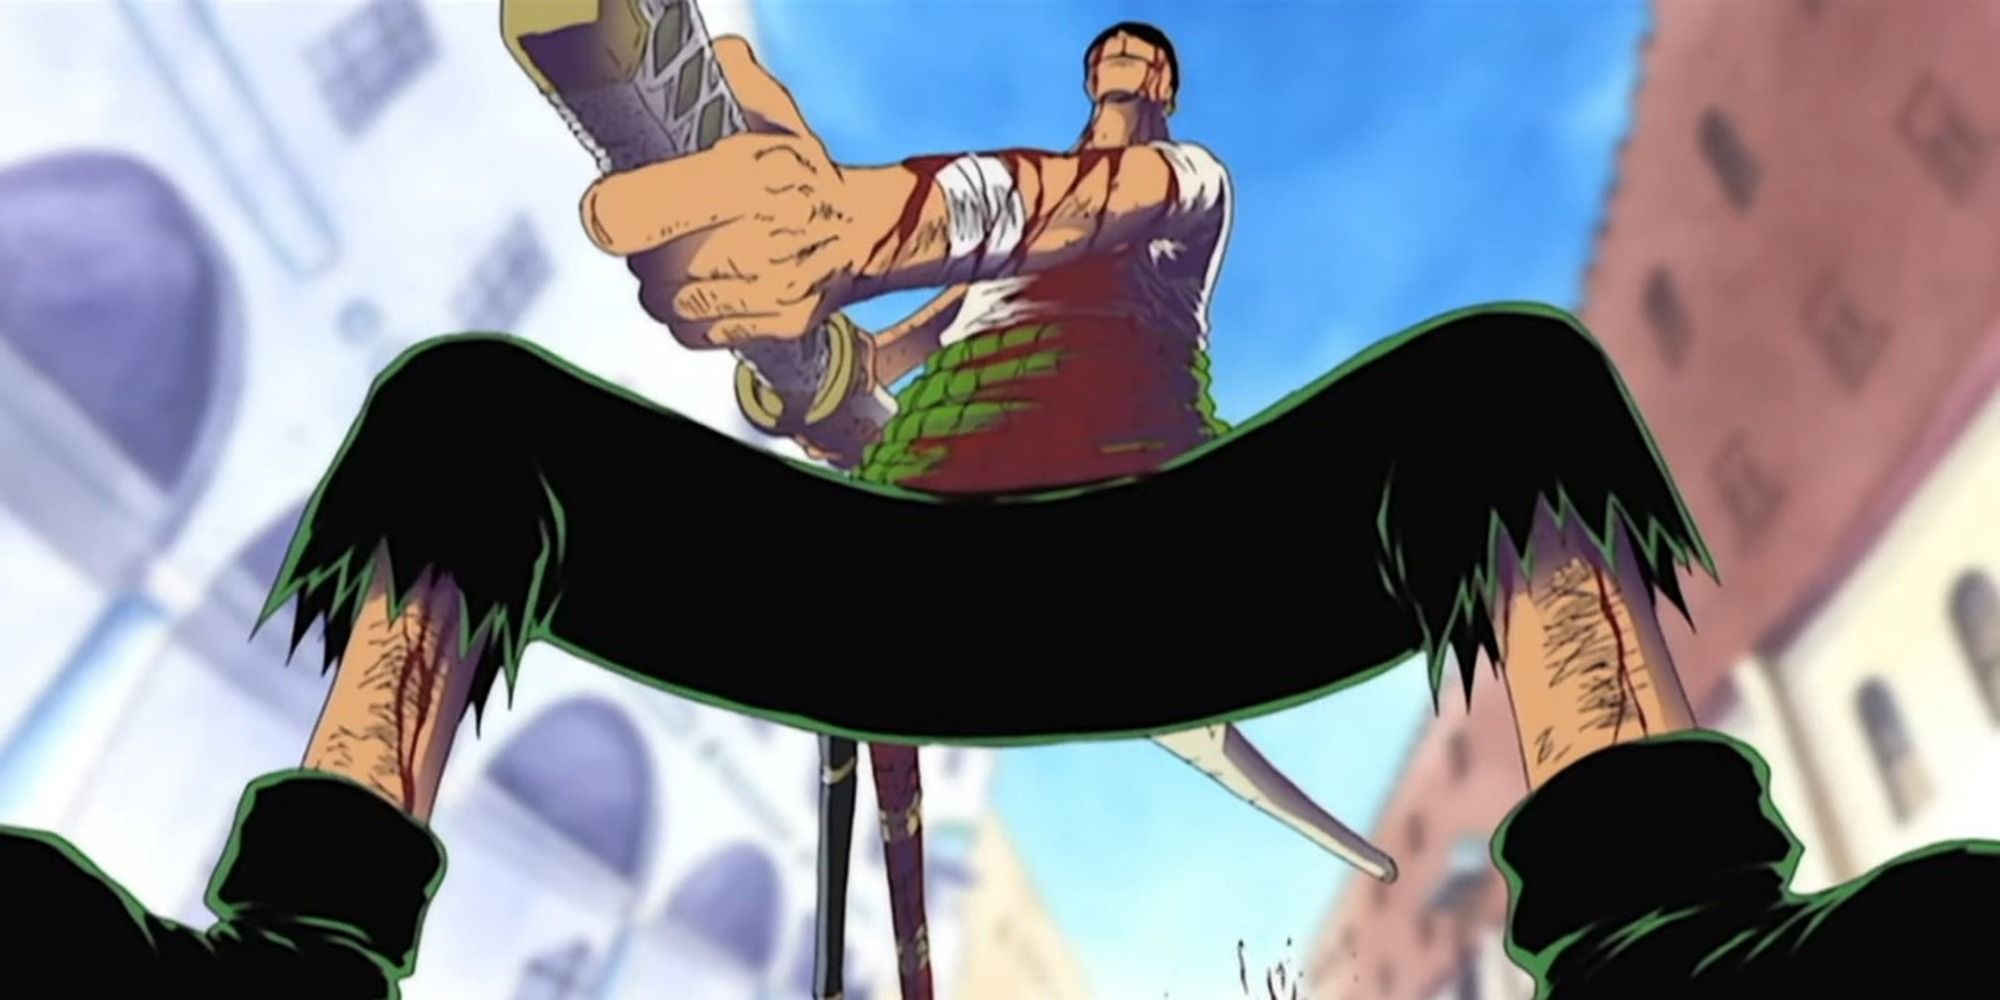 Zoro vs Mr. 1 is one of the best One Piece fights.